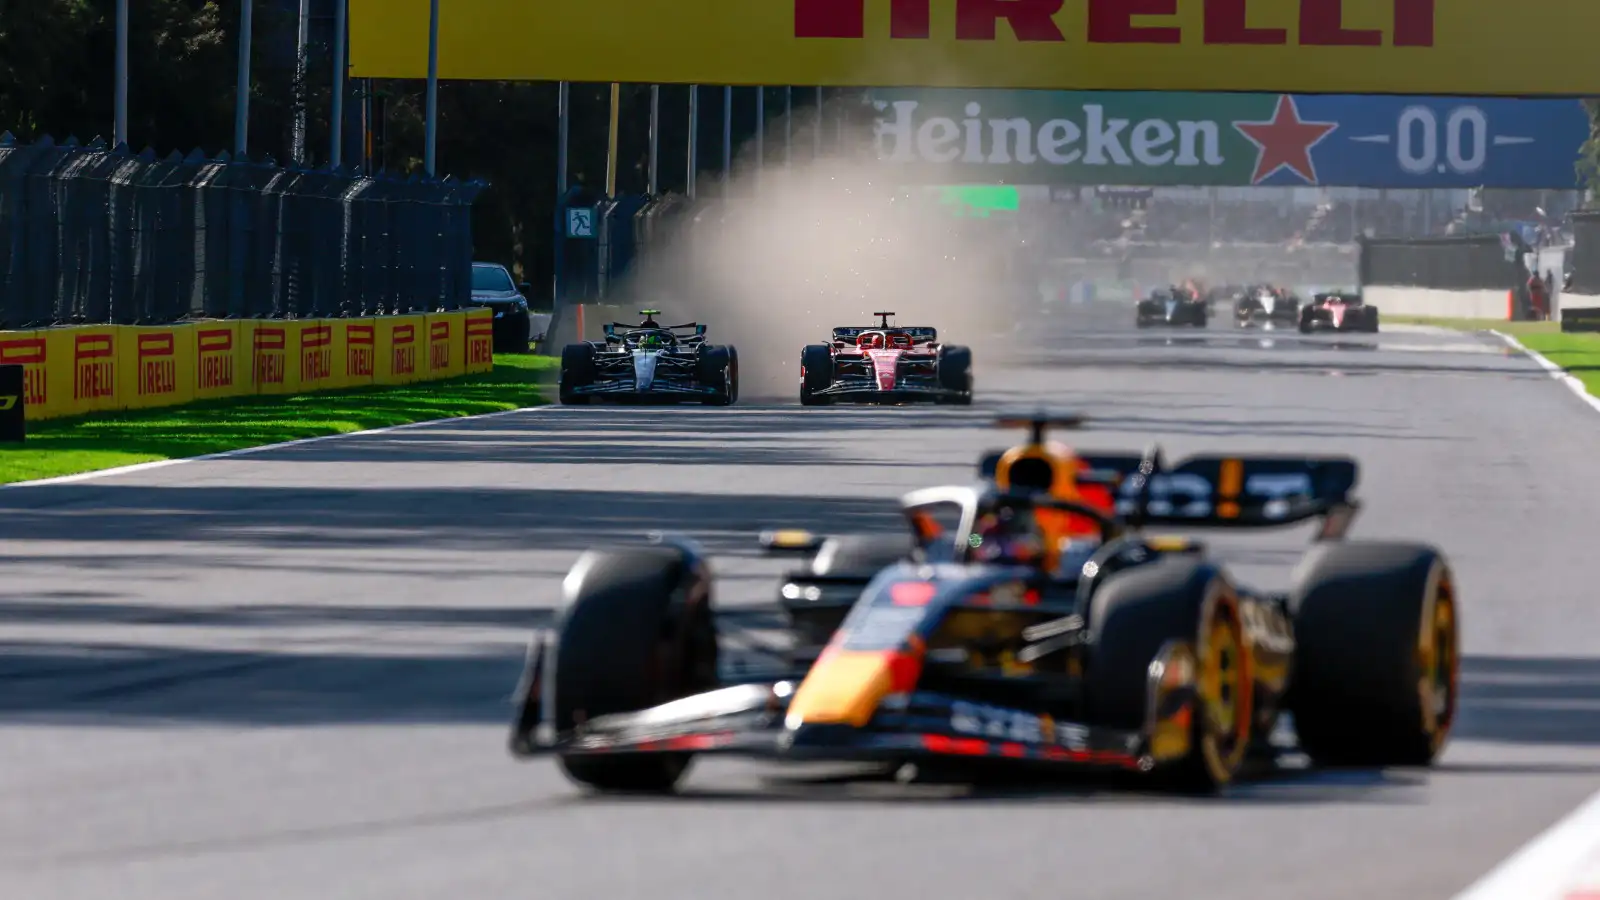 Red Bull driver Max Verstappen leads ahead of Charles Leclerc and Lewis Hamilton.